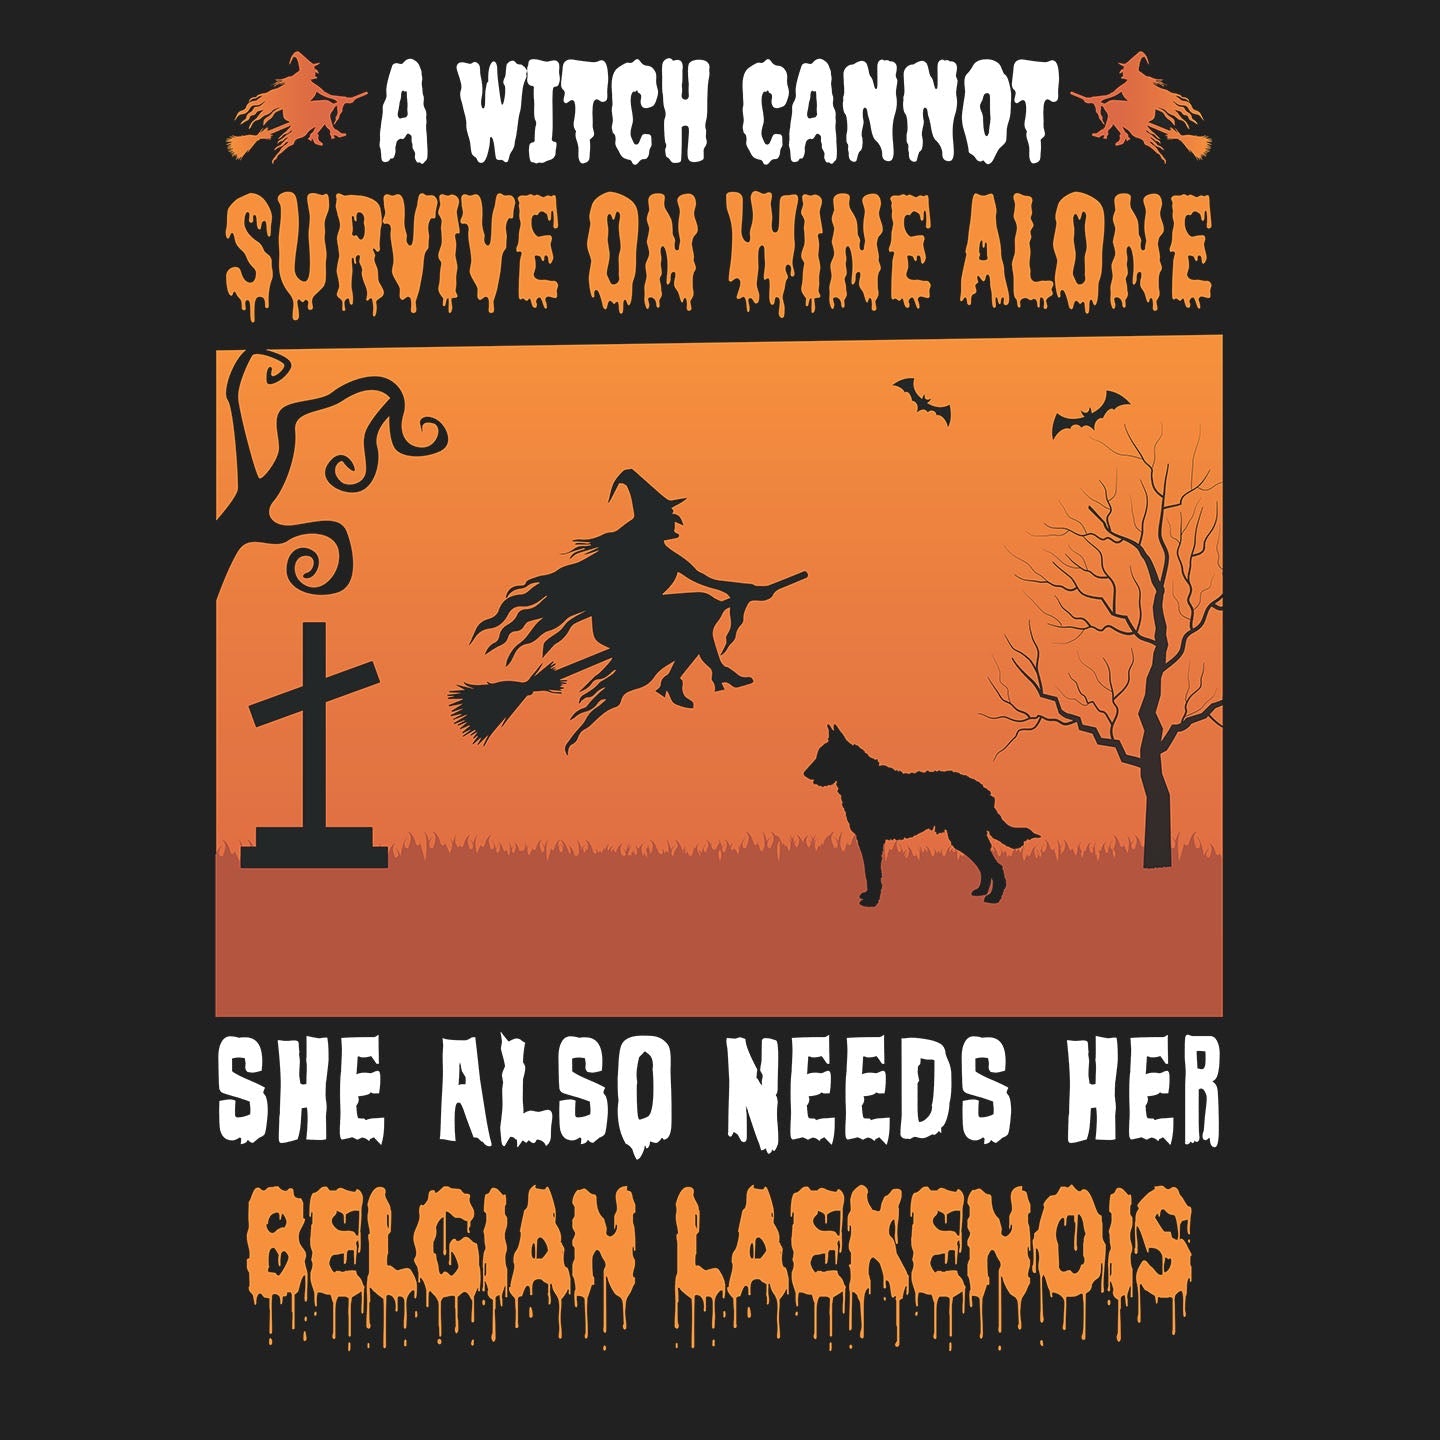 A Witch Needs Her Belgian Laekenois - Adult Unisex T-Shirt